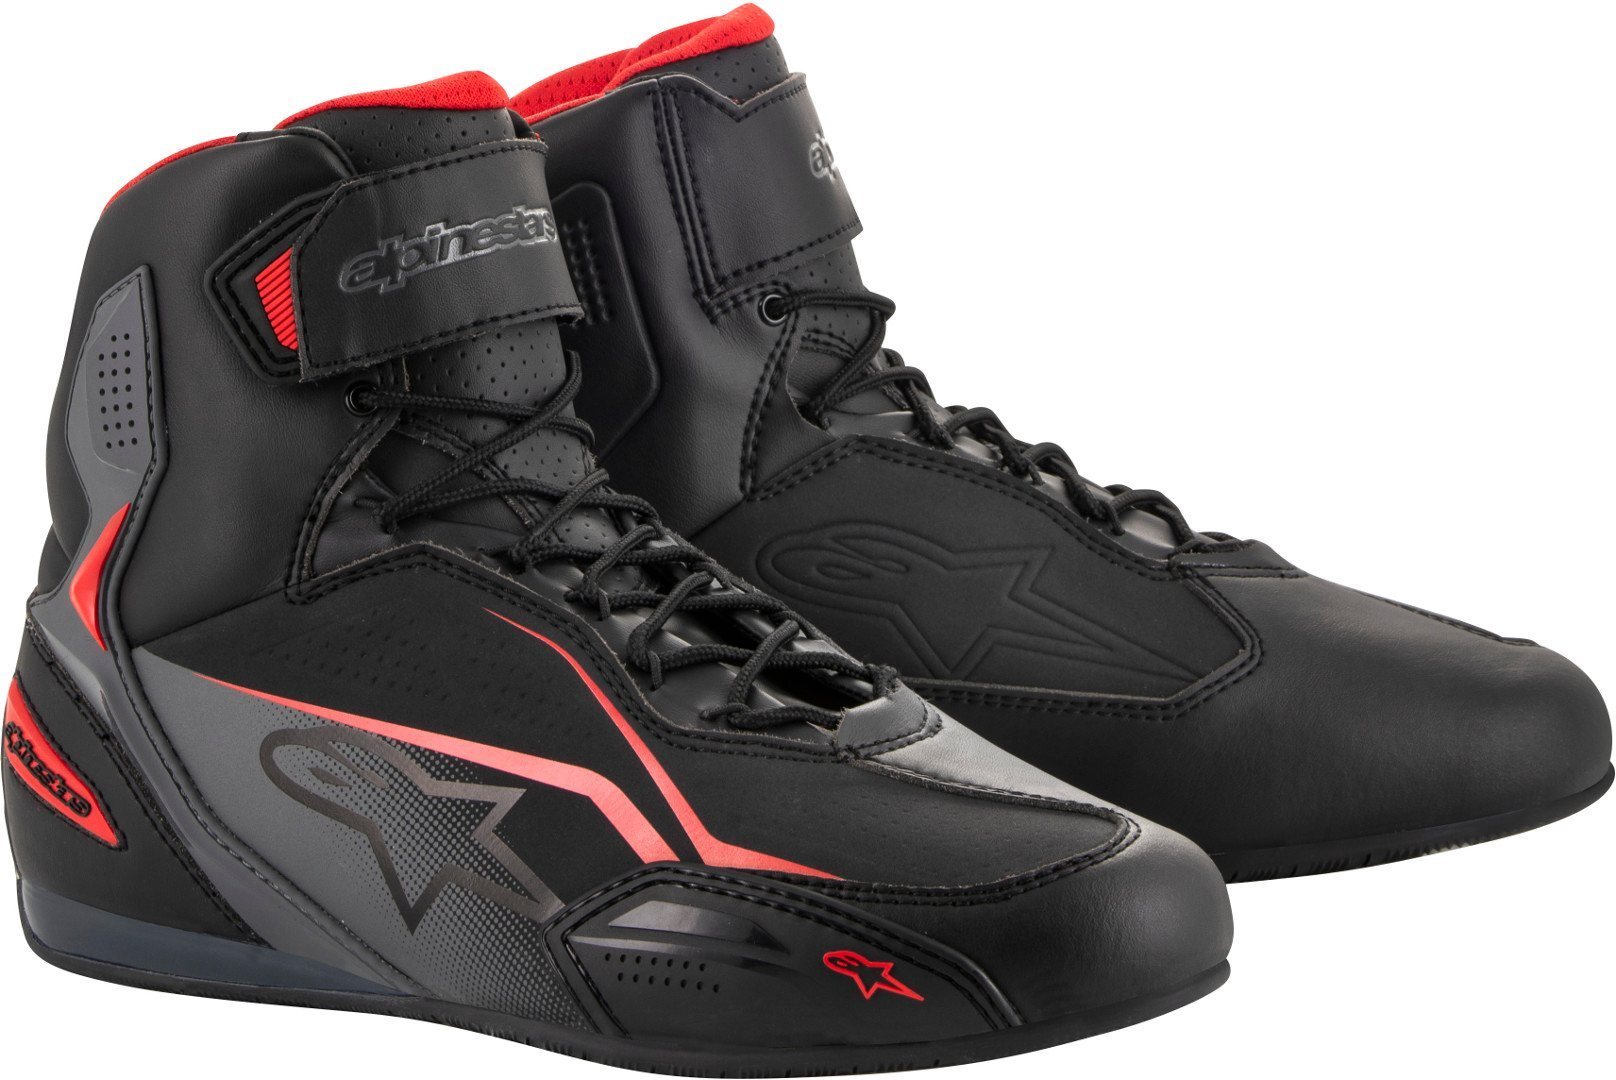 Alpinestars Faster-3 Motorcycle Shoes, black-grey-red, Size 45, black-grey-red, Size 45